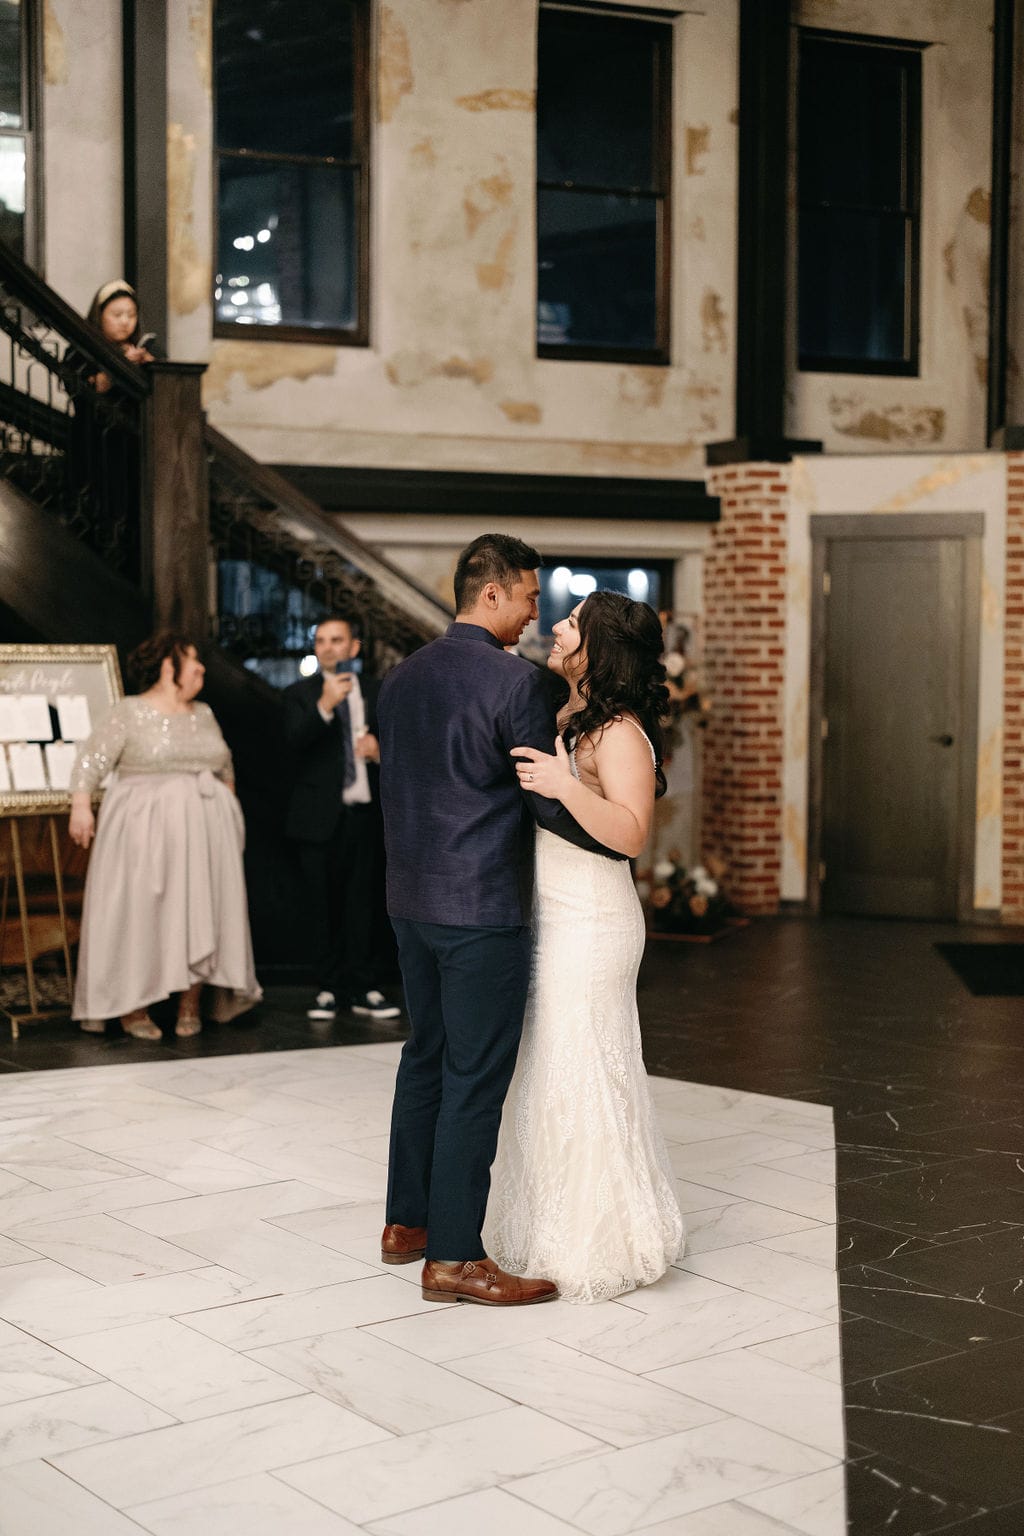 Couple smiles at each other during their first dance as husband and wife at Ironworks Wedding Venue at their reception party